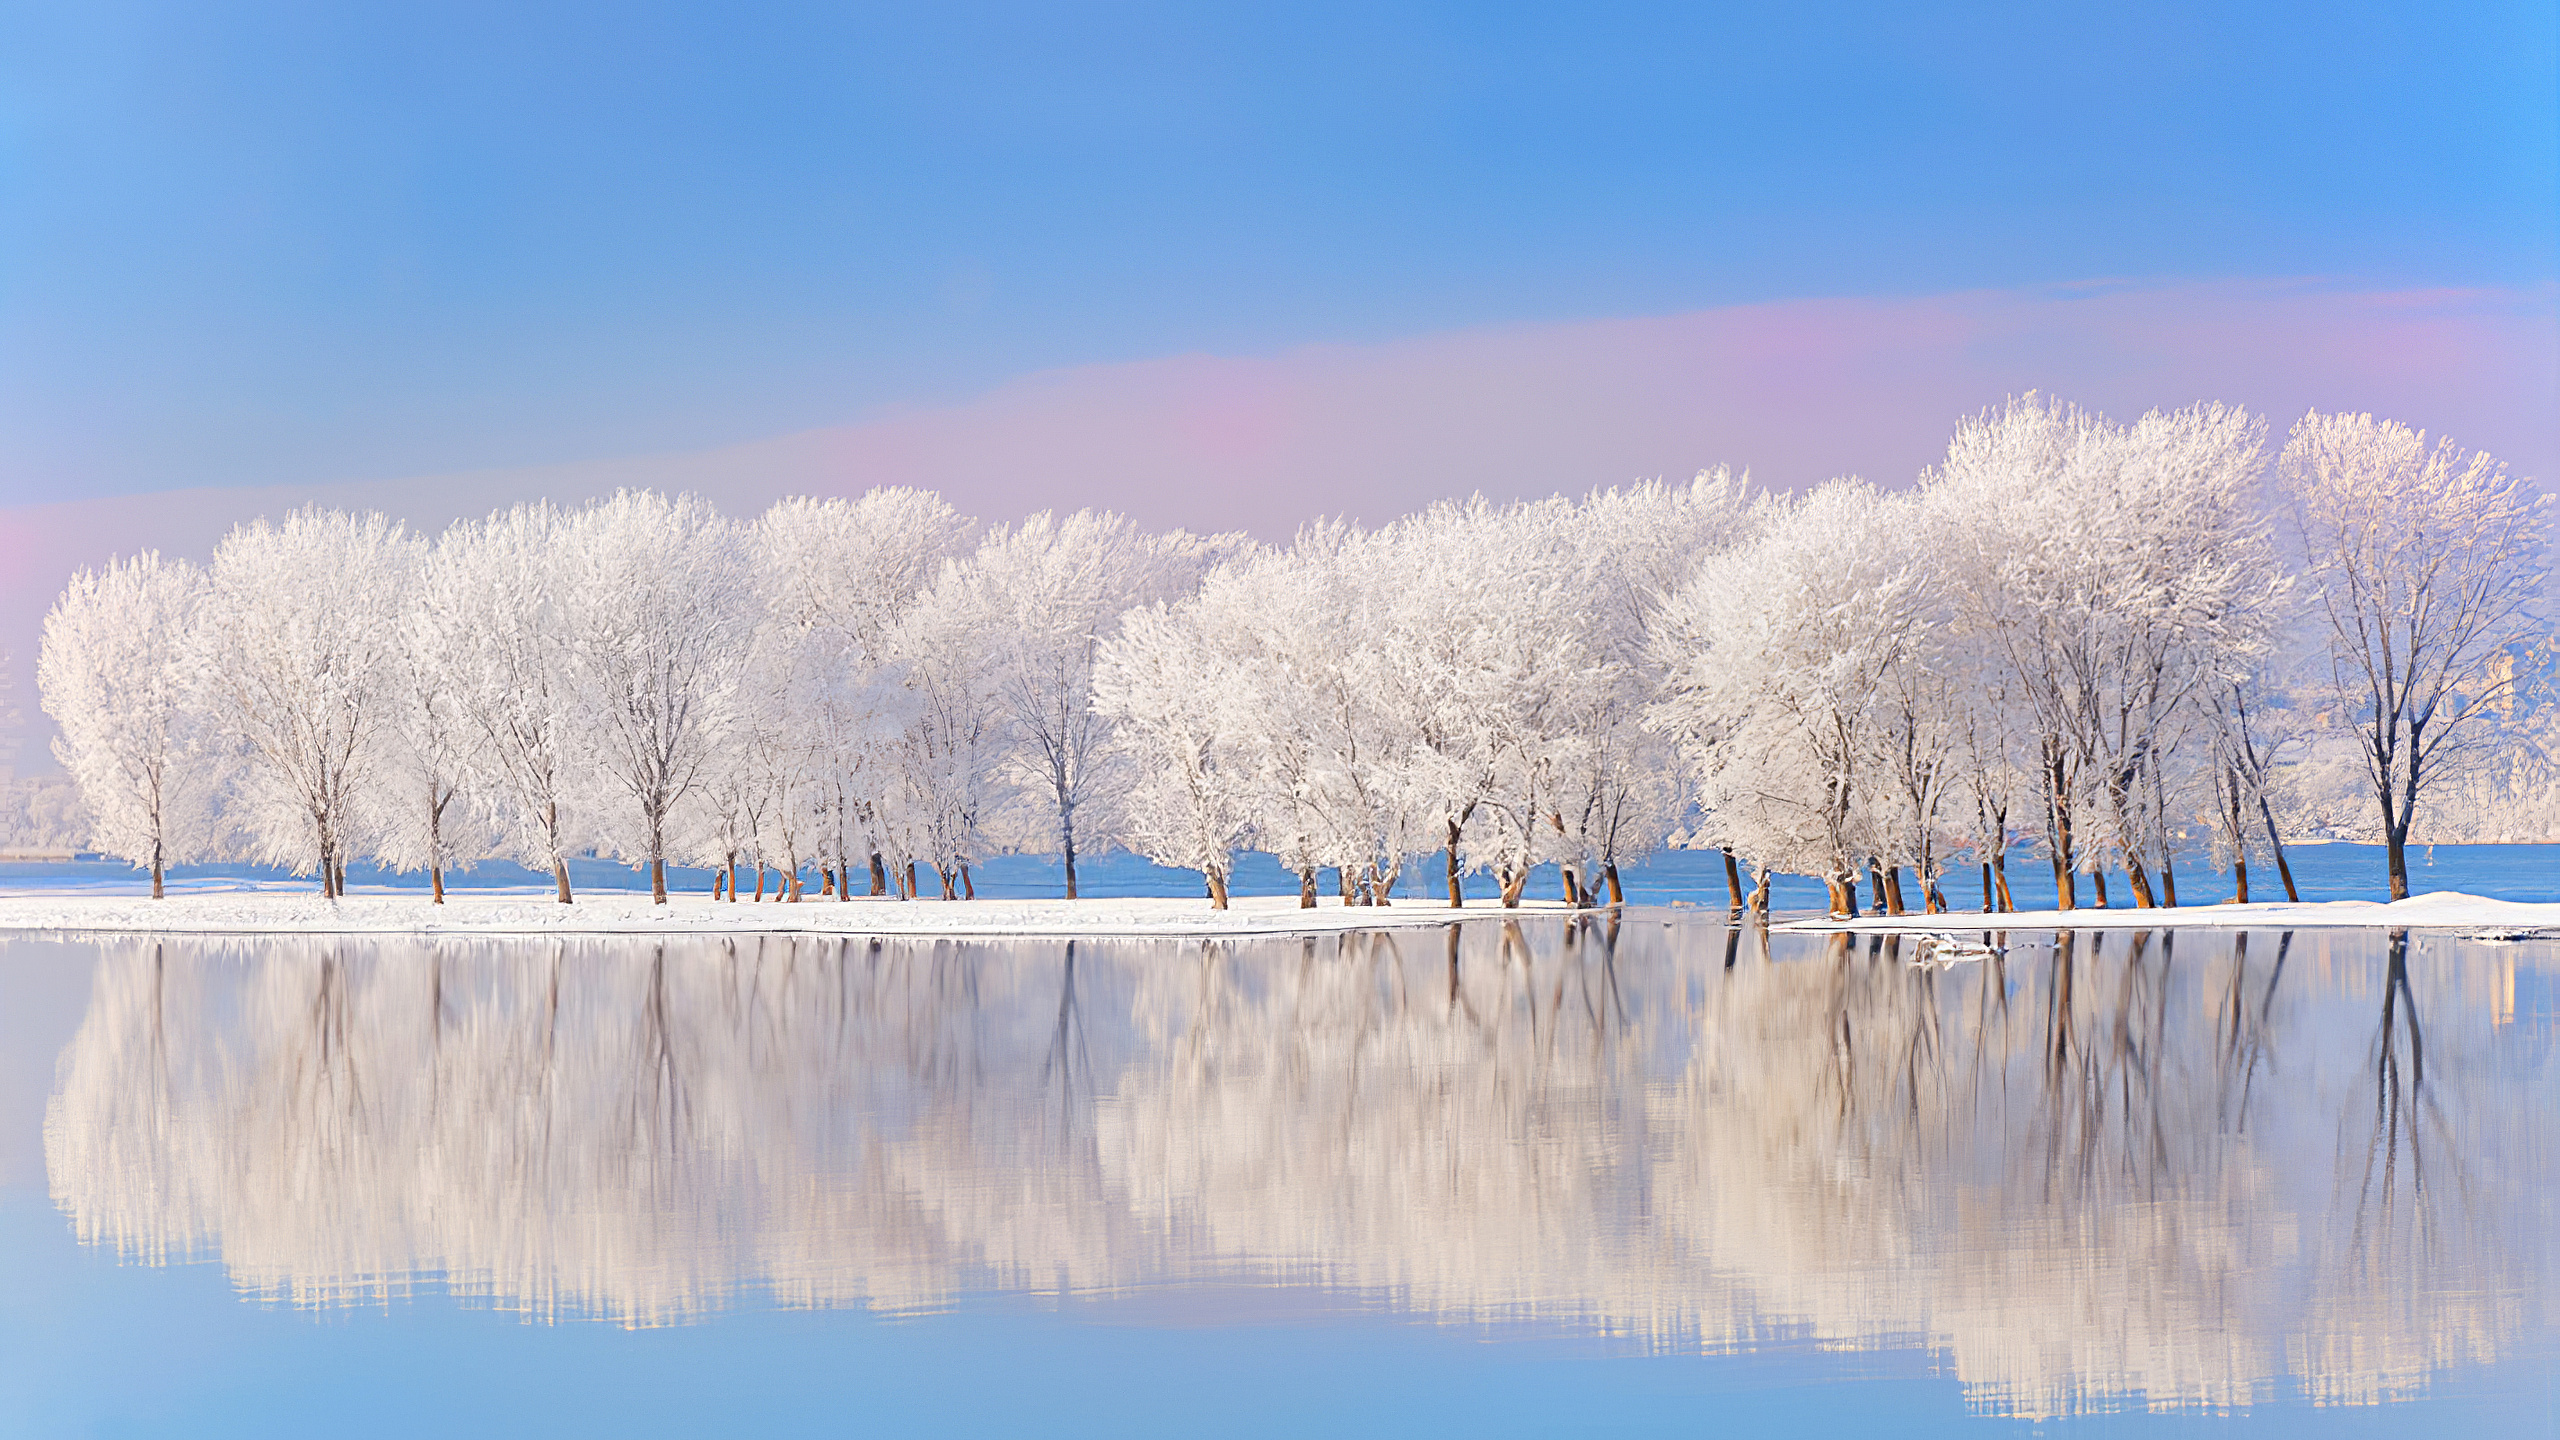 General 2560x1440 nature landscape water trees snow cold daylight white reflection